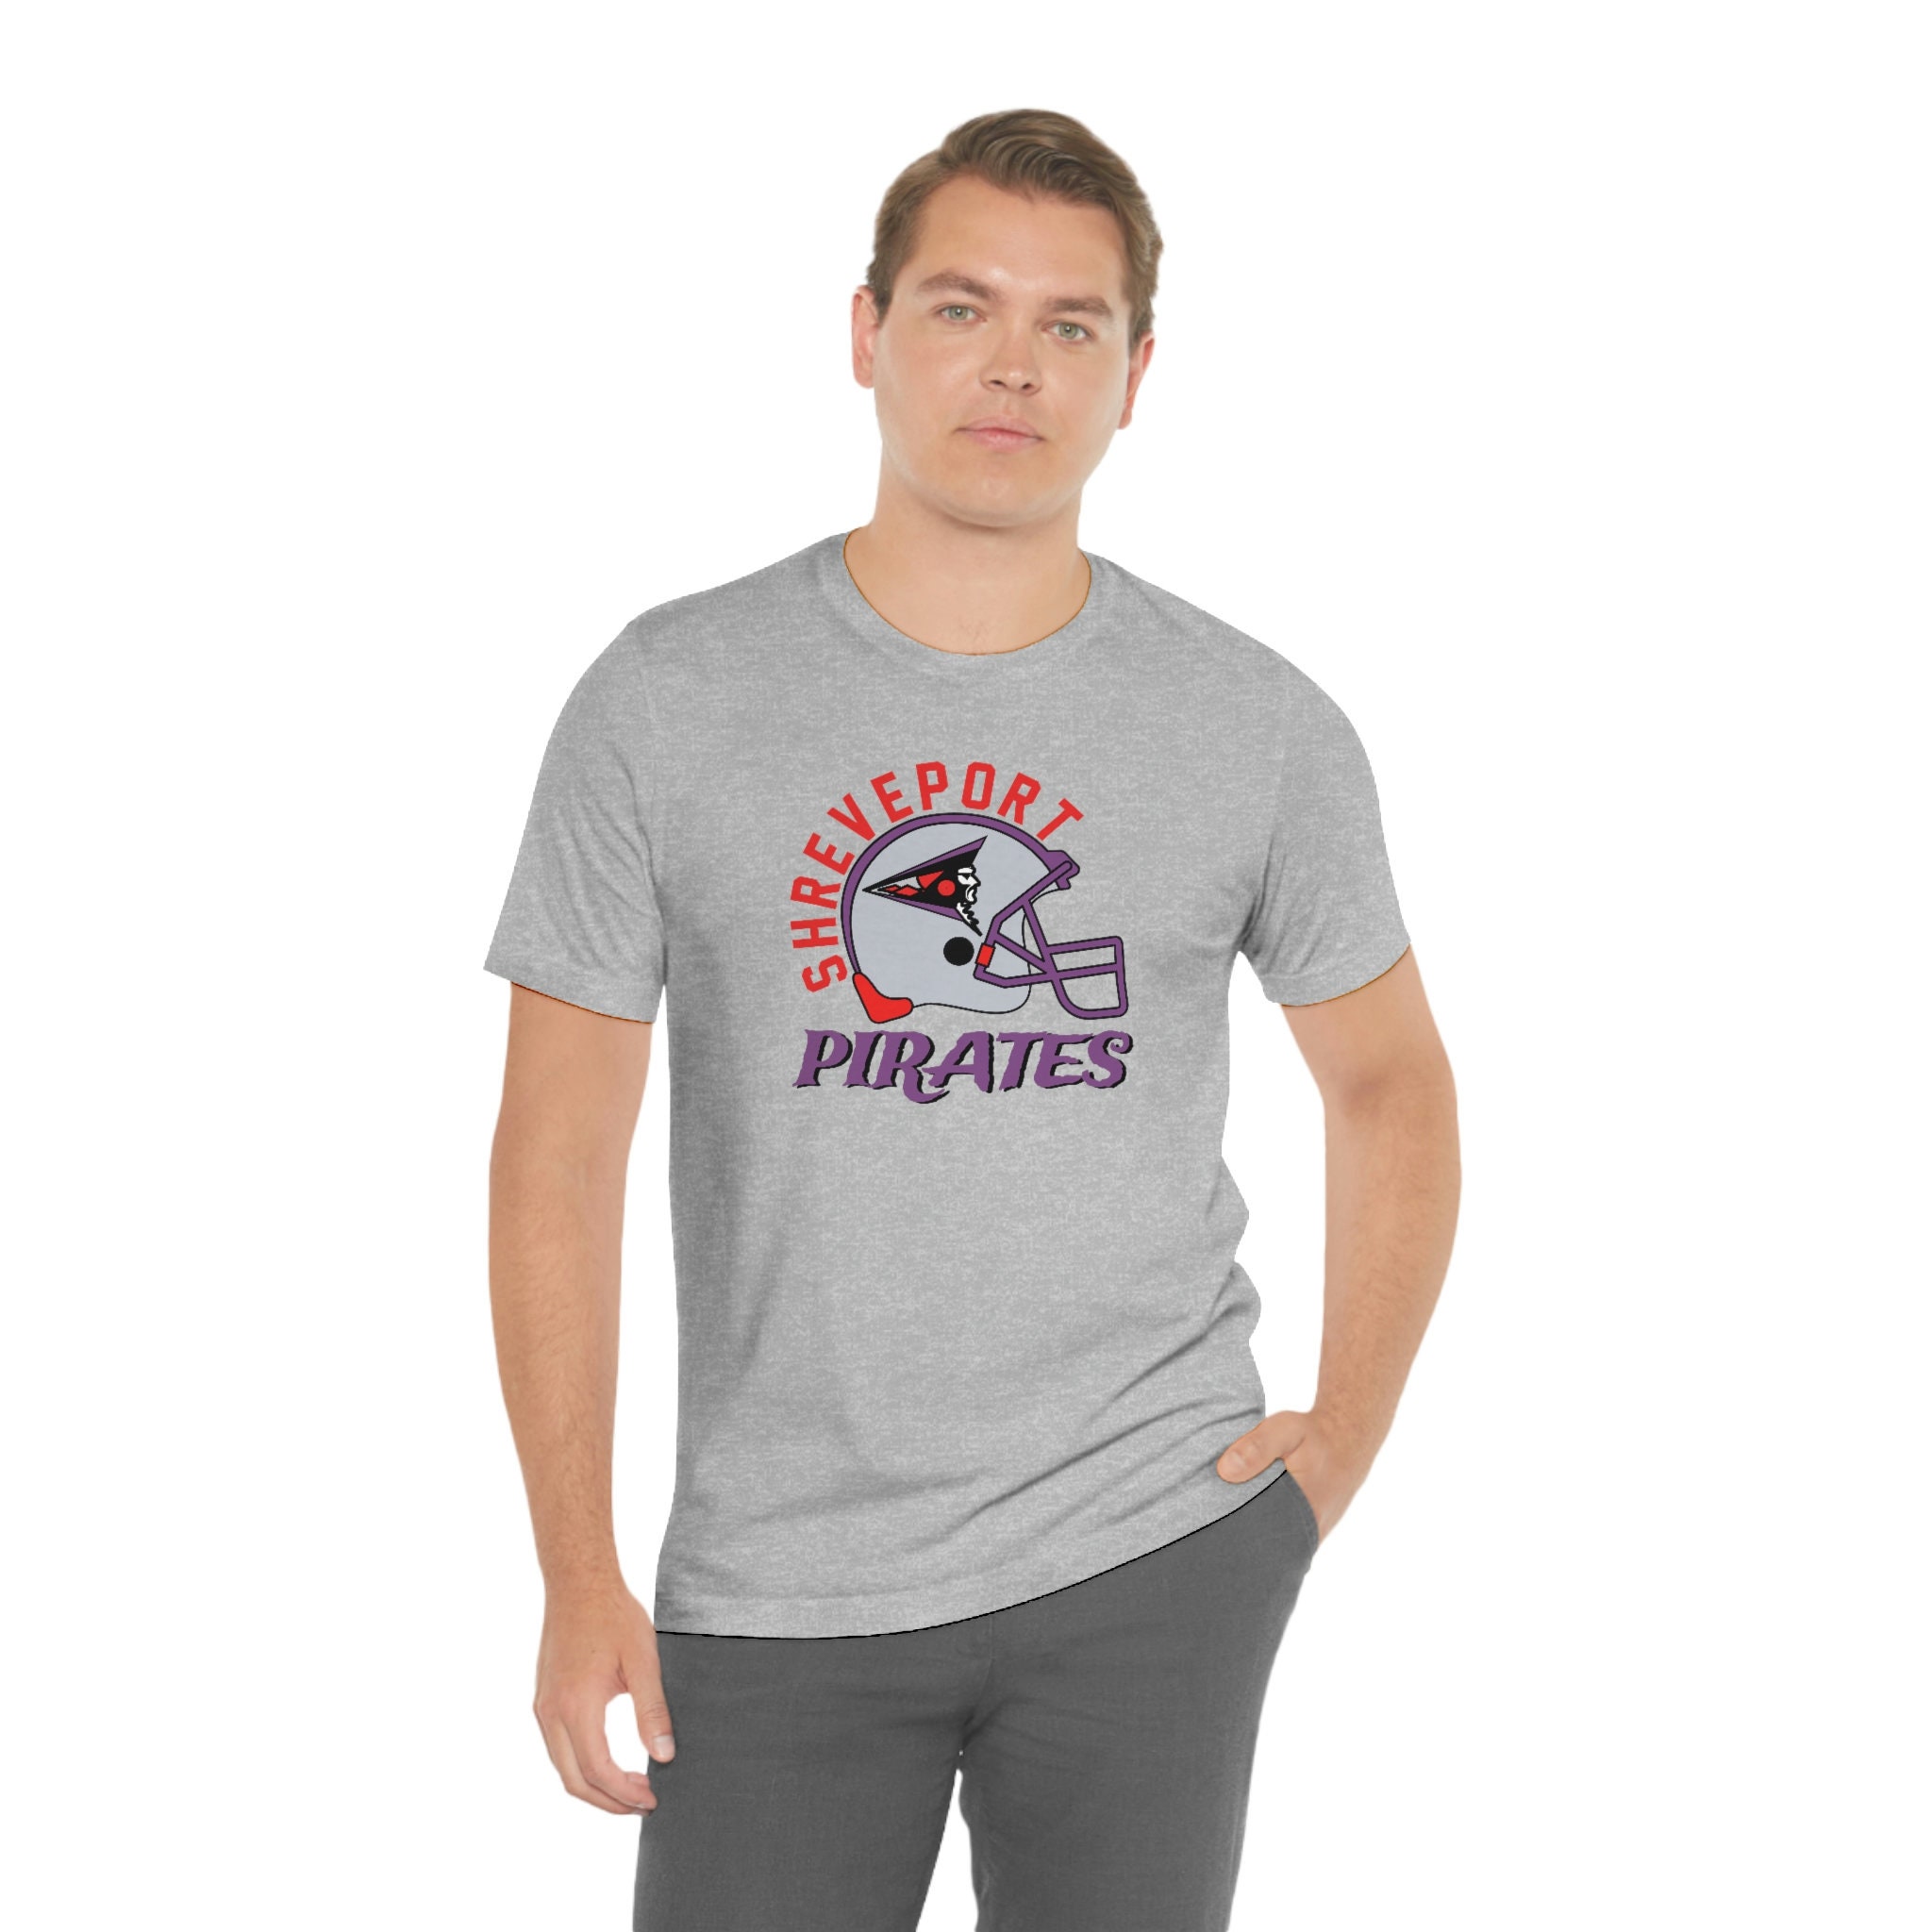 Shreveport Pirates CFL Fan Apparel and Souvenirs for sale